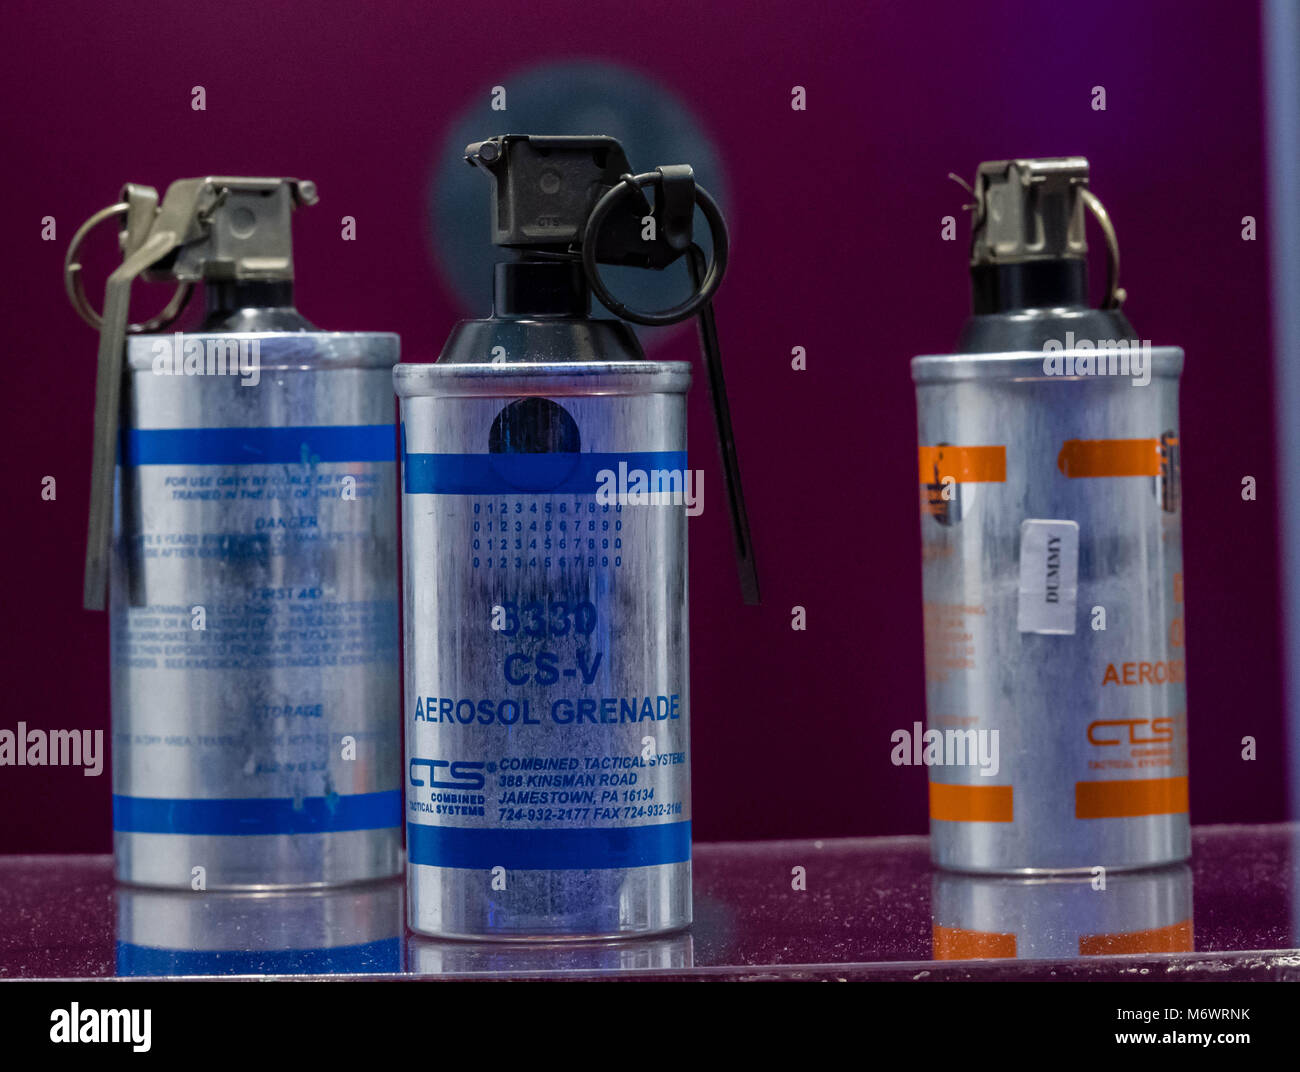 London, UK. 6th March 2018, Security and Counter Terror expo, CS gas grenades on display Credit: Ian Davidson/Alamy Live News Stock Photo